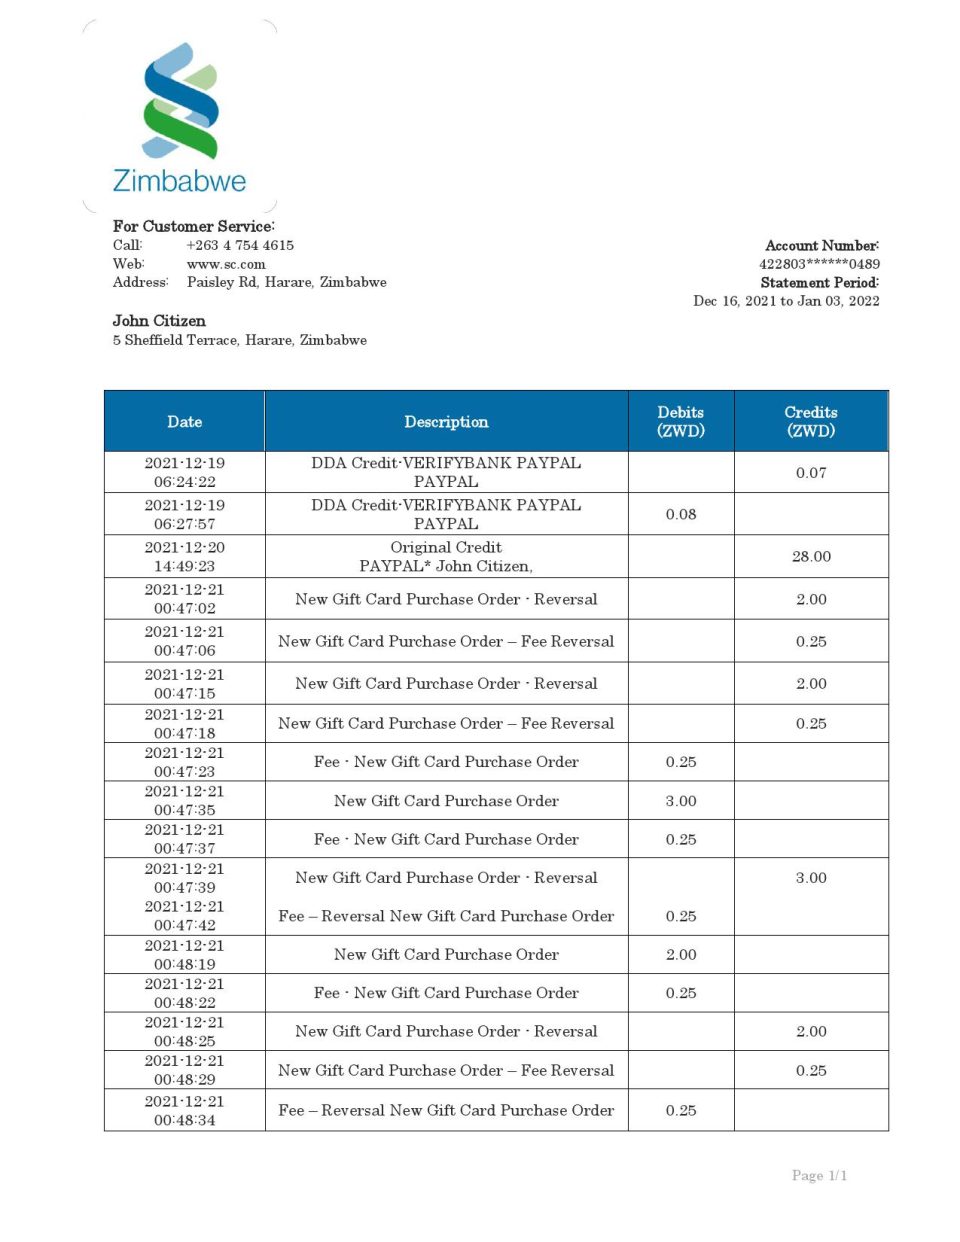 Zimbabwe Standard Chartered Bank statement template in Word and PDF format